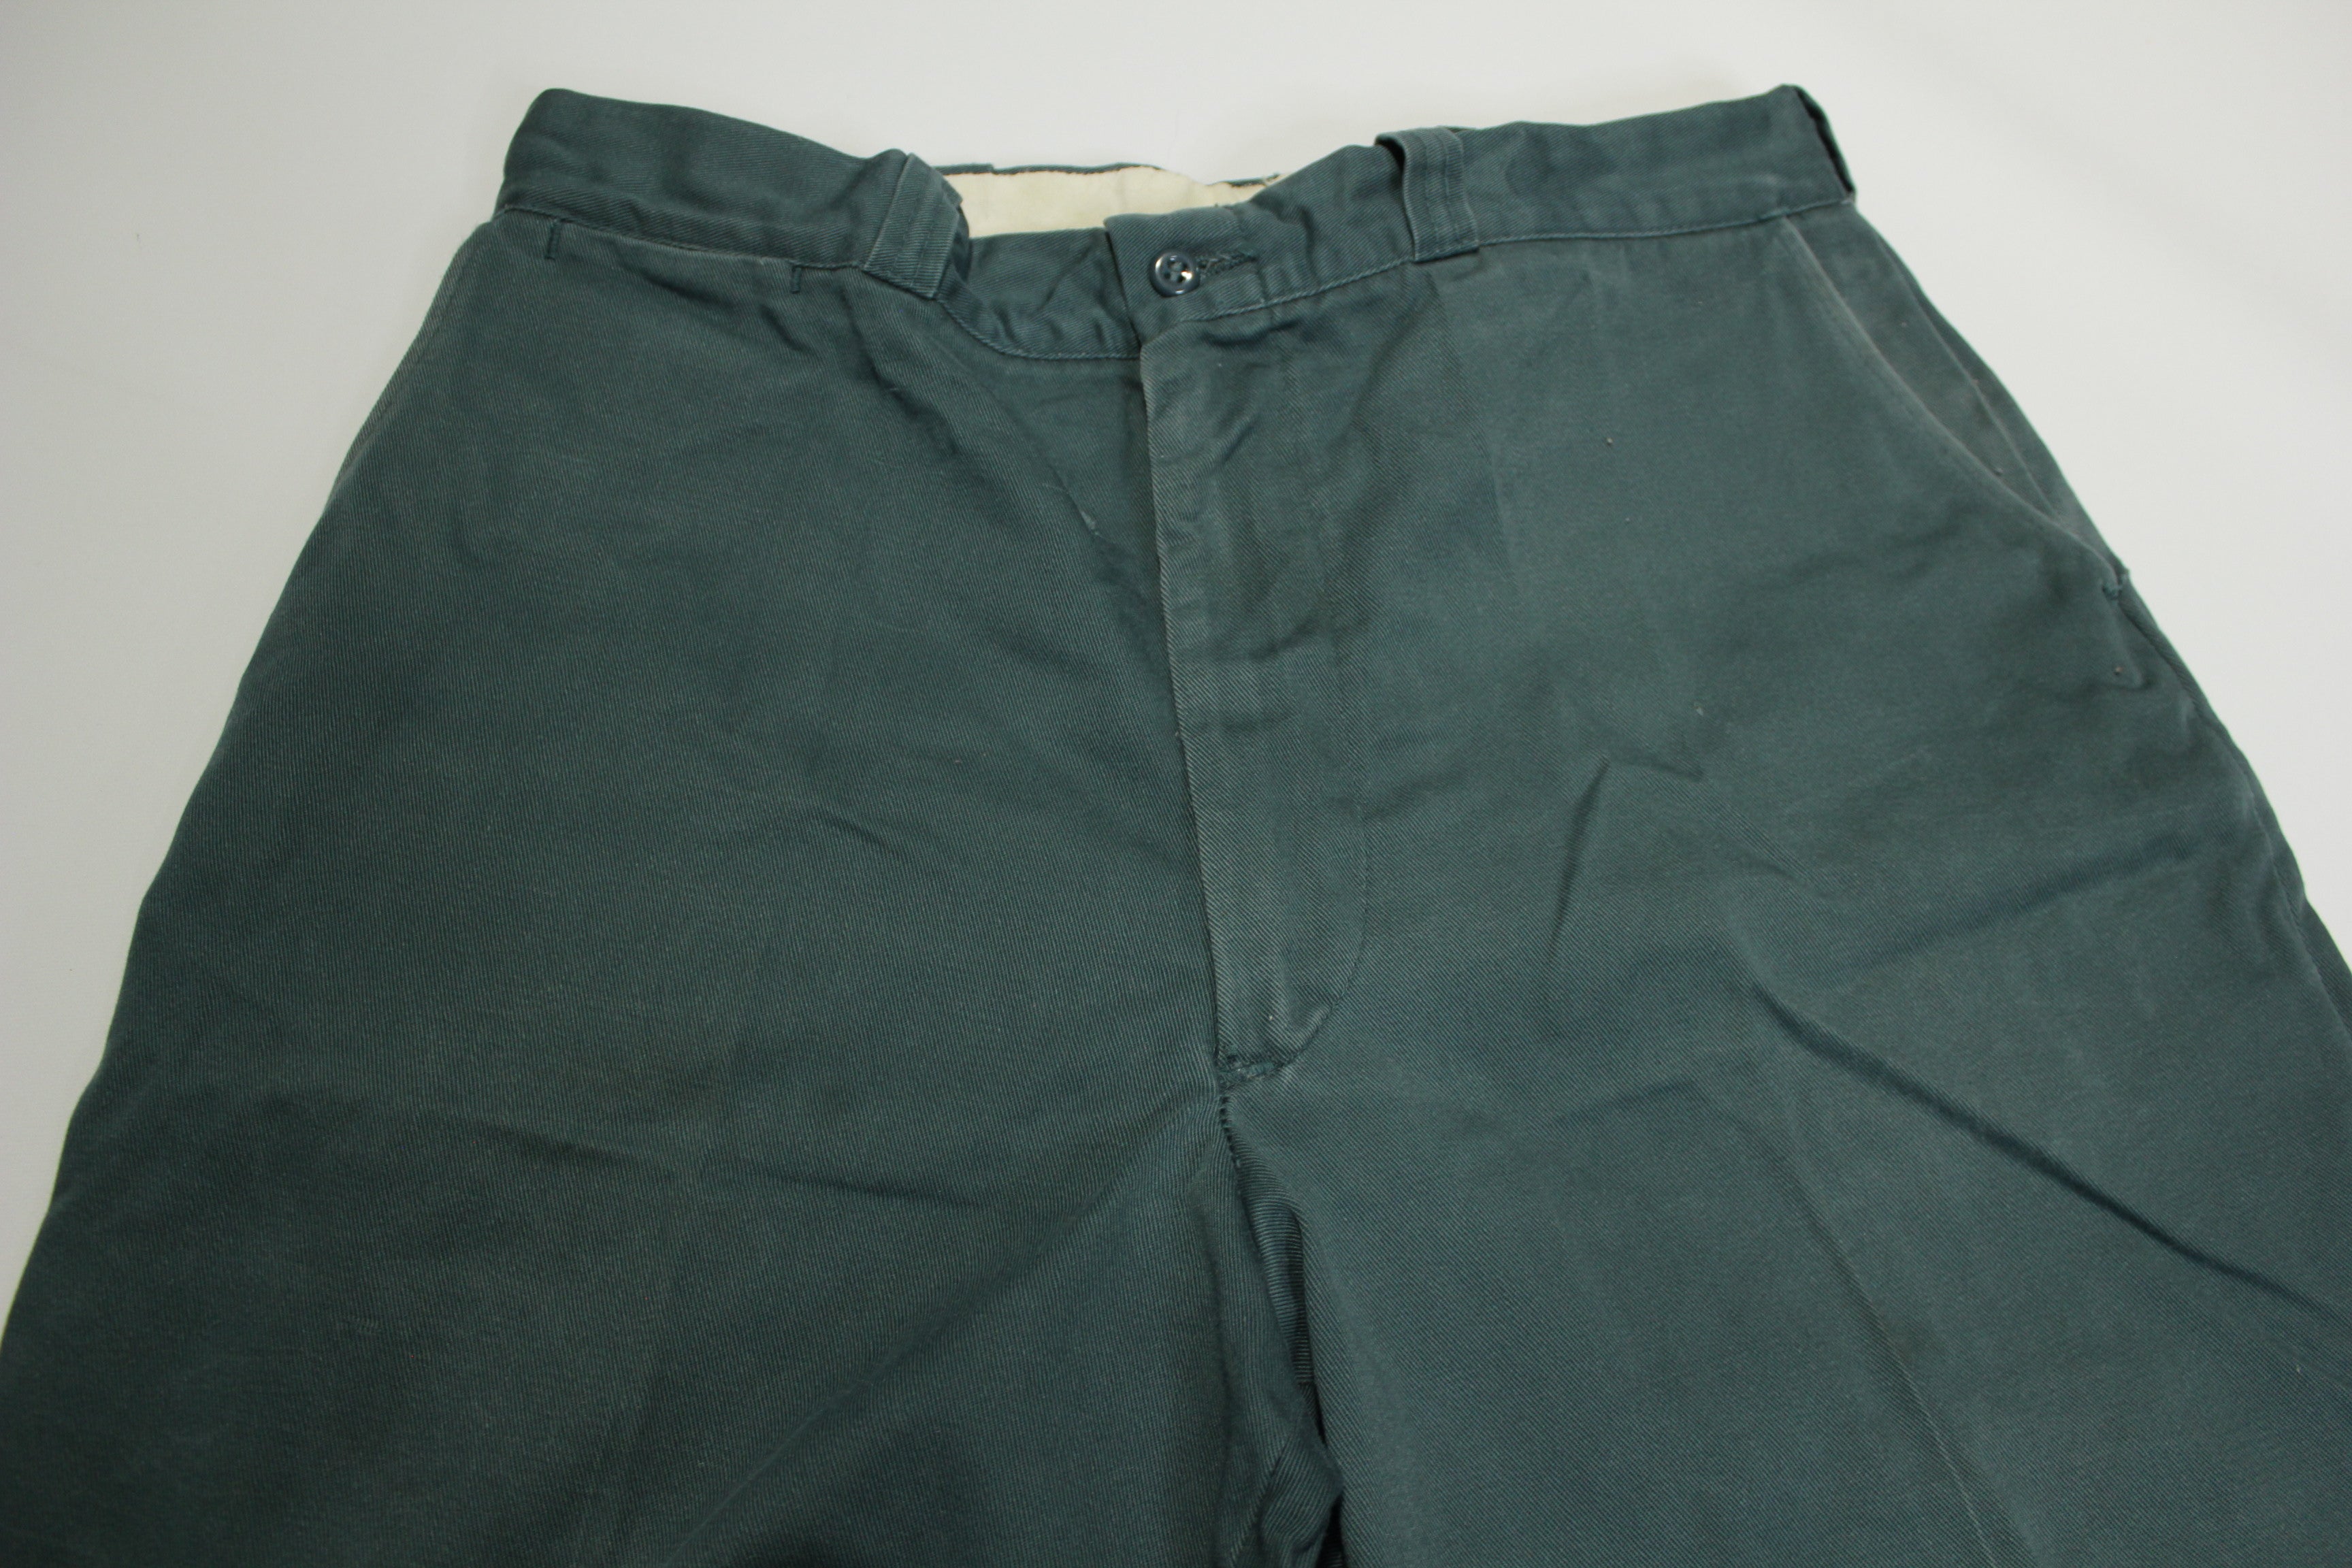 Penneys Big Mac Durable Press Vintage 70's Green Chino Rolled Cuff